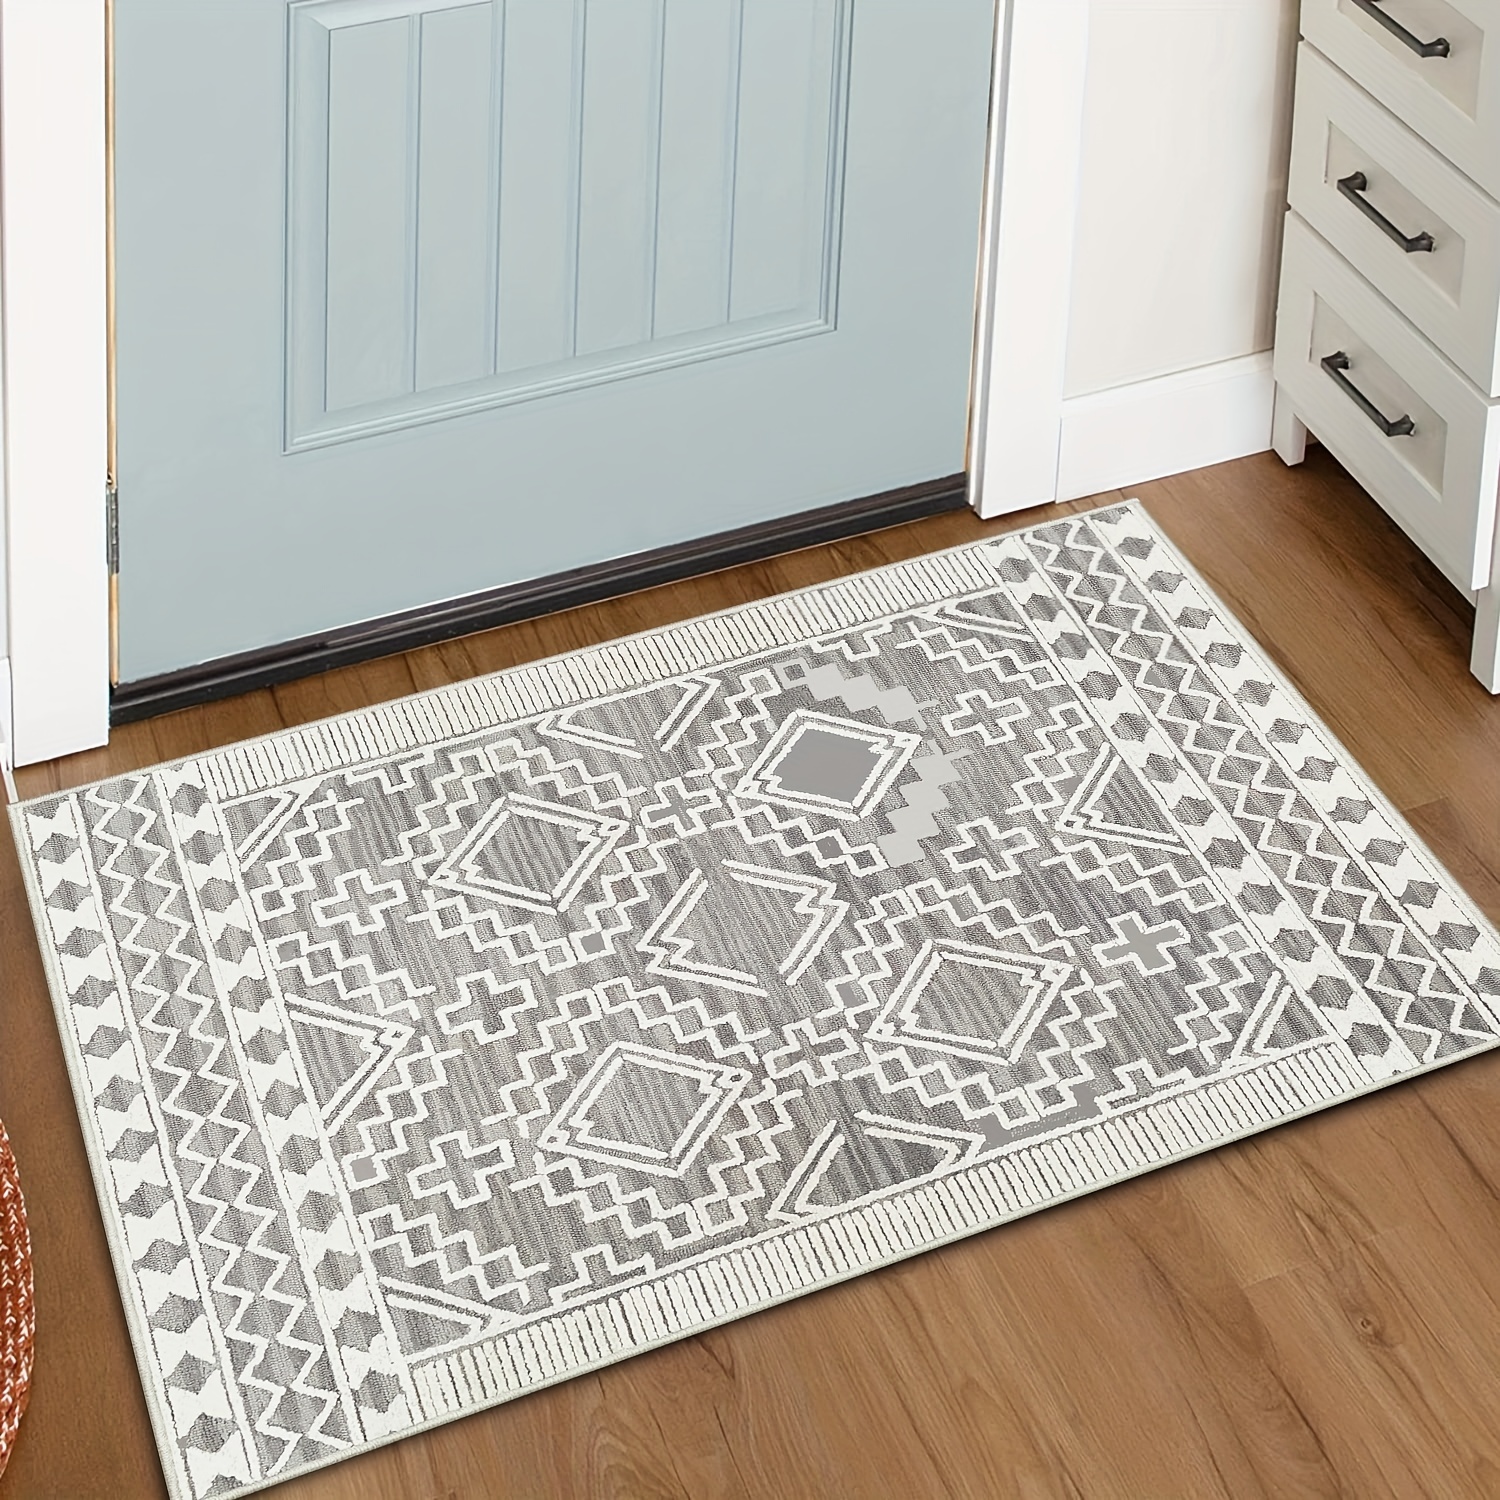 Small Boho Vintage Rug for Front Door Patio Entrance